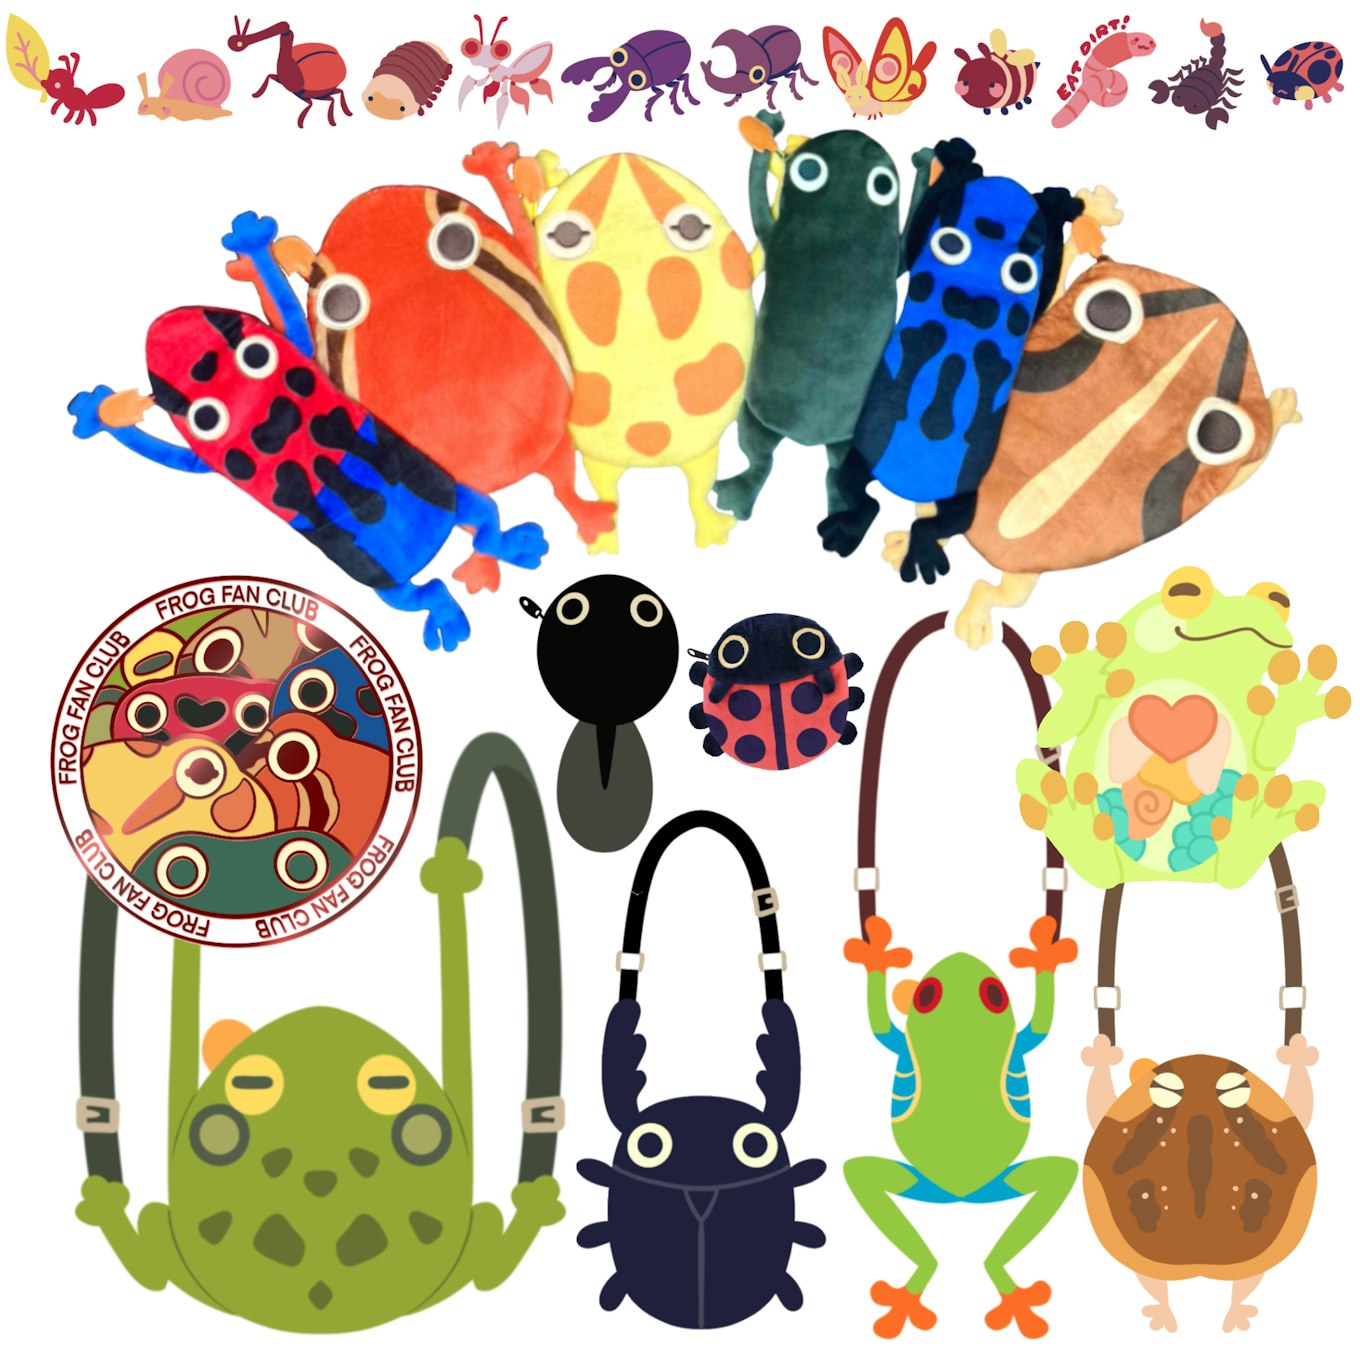 Frog Bag collection + bug stickers Updates - BackerKit